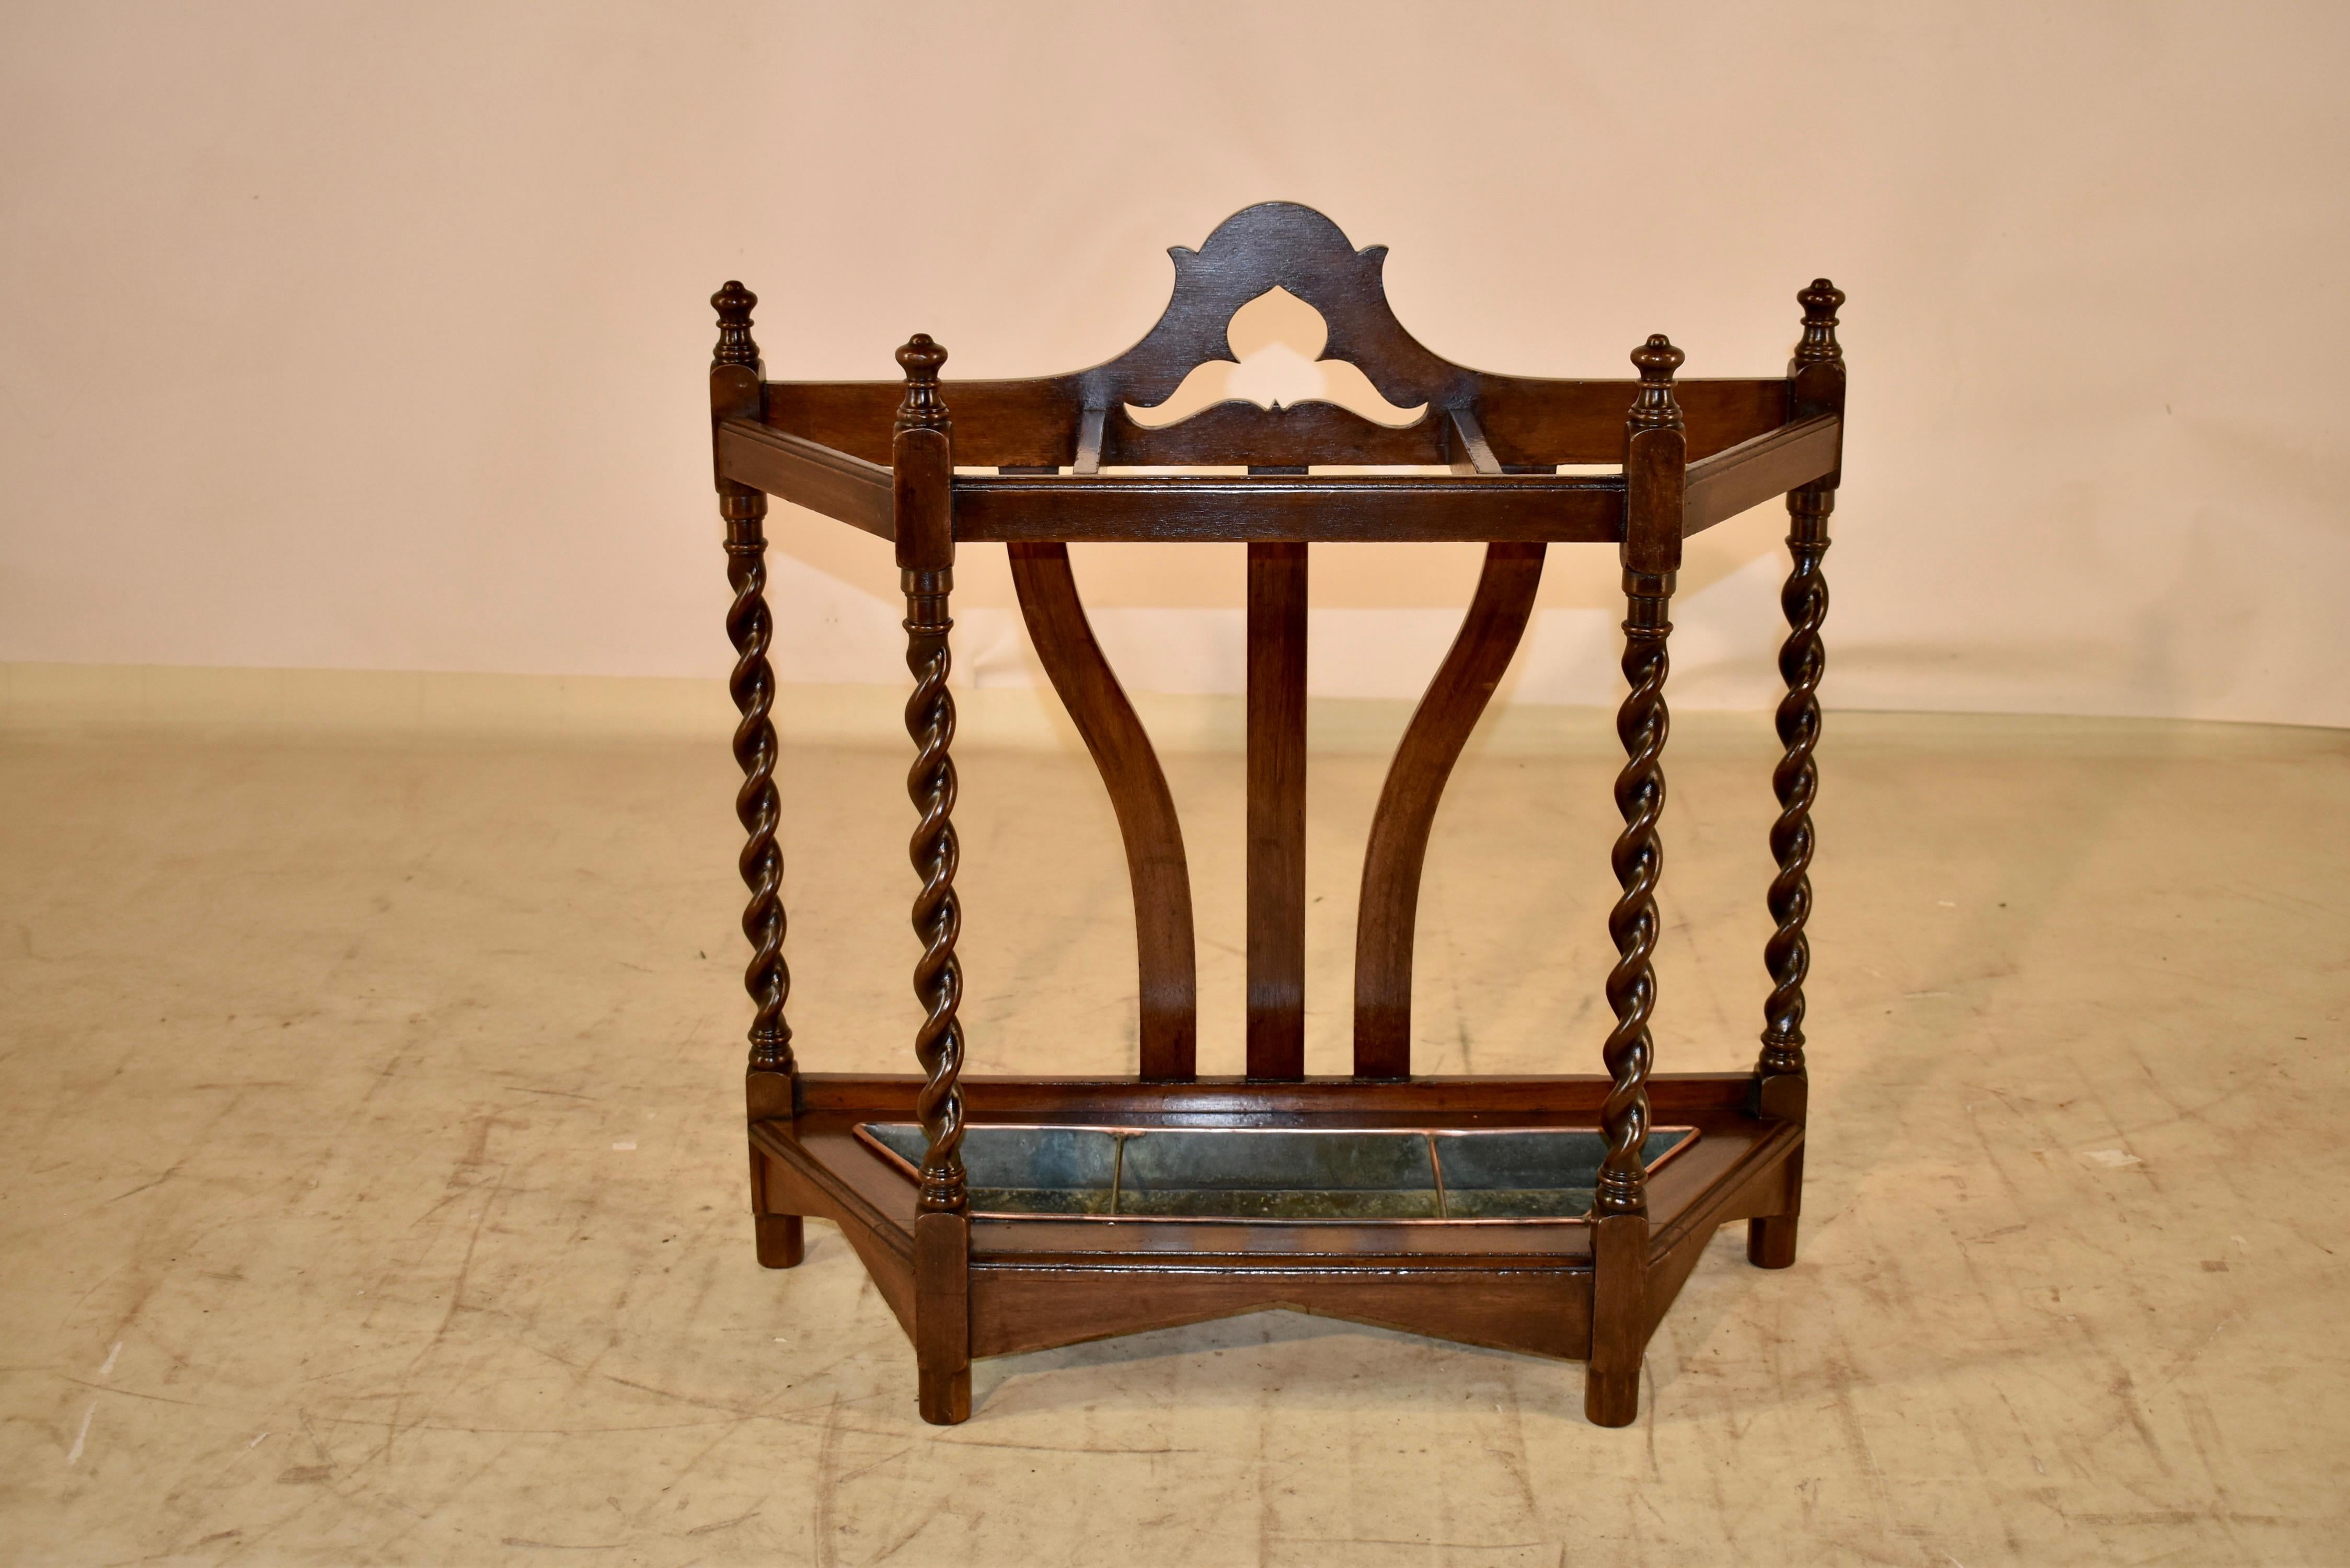 19th century oak umbrella or cane stand from England.  The back has lovely serpentine and scalloped details, which give it a lovely shape and will lend itself to a beautiful silhouette against a wall.  The rails are simple and topped with hand